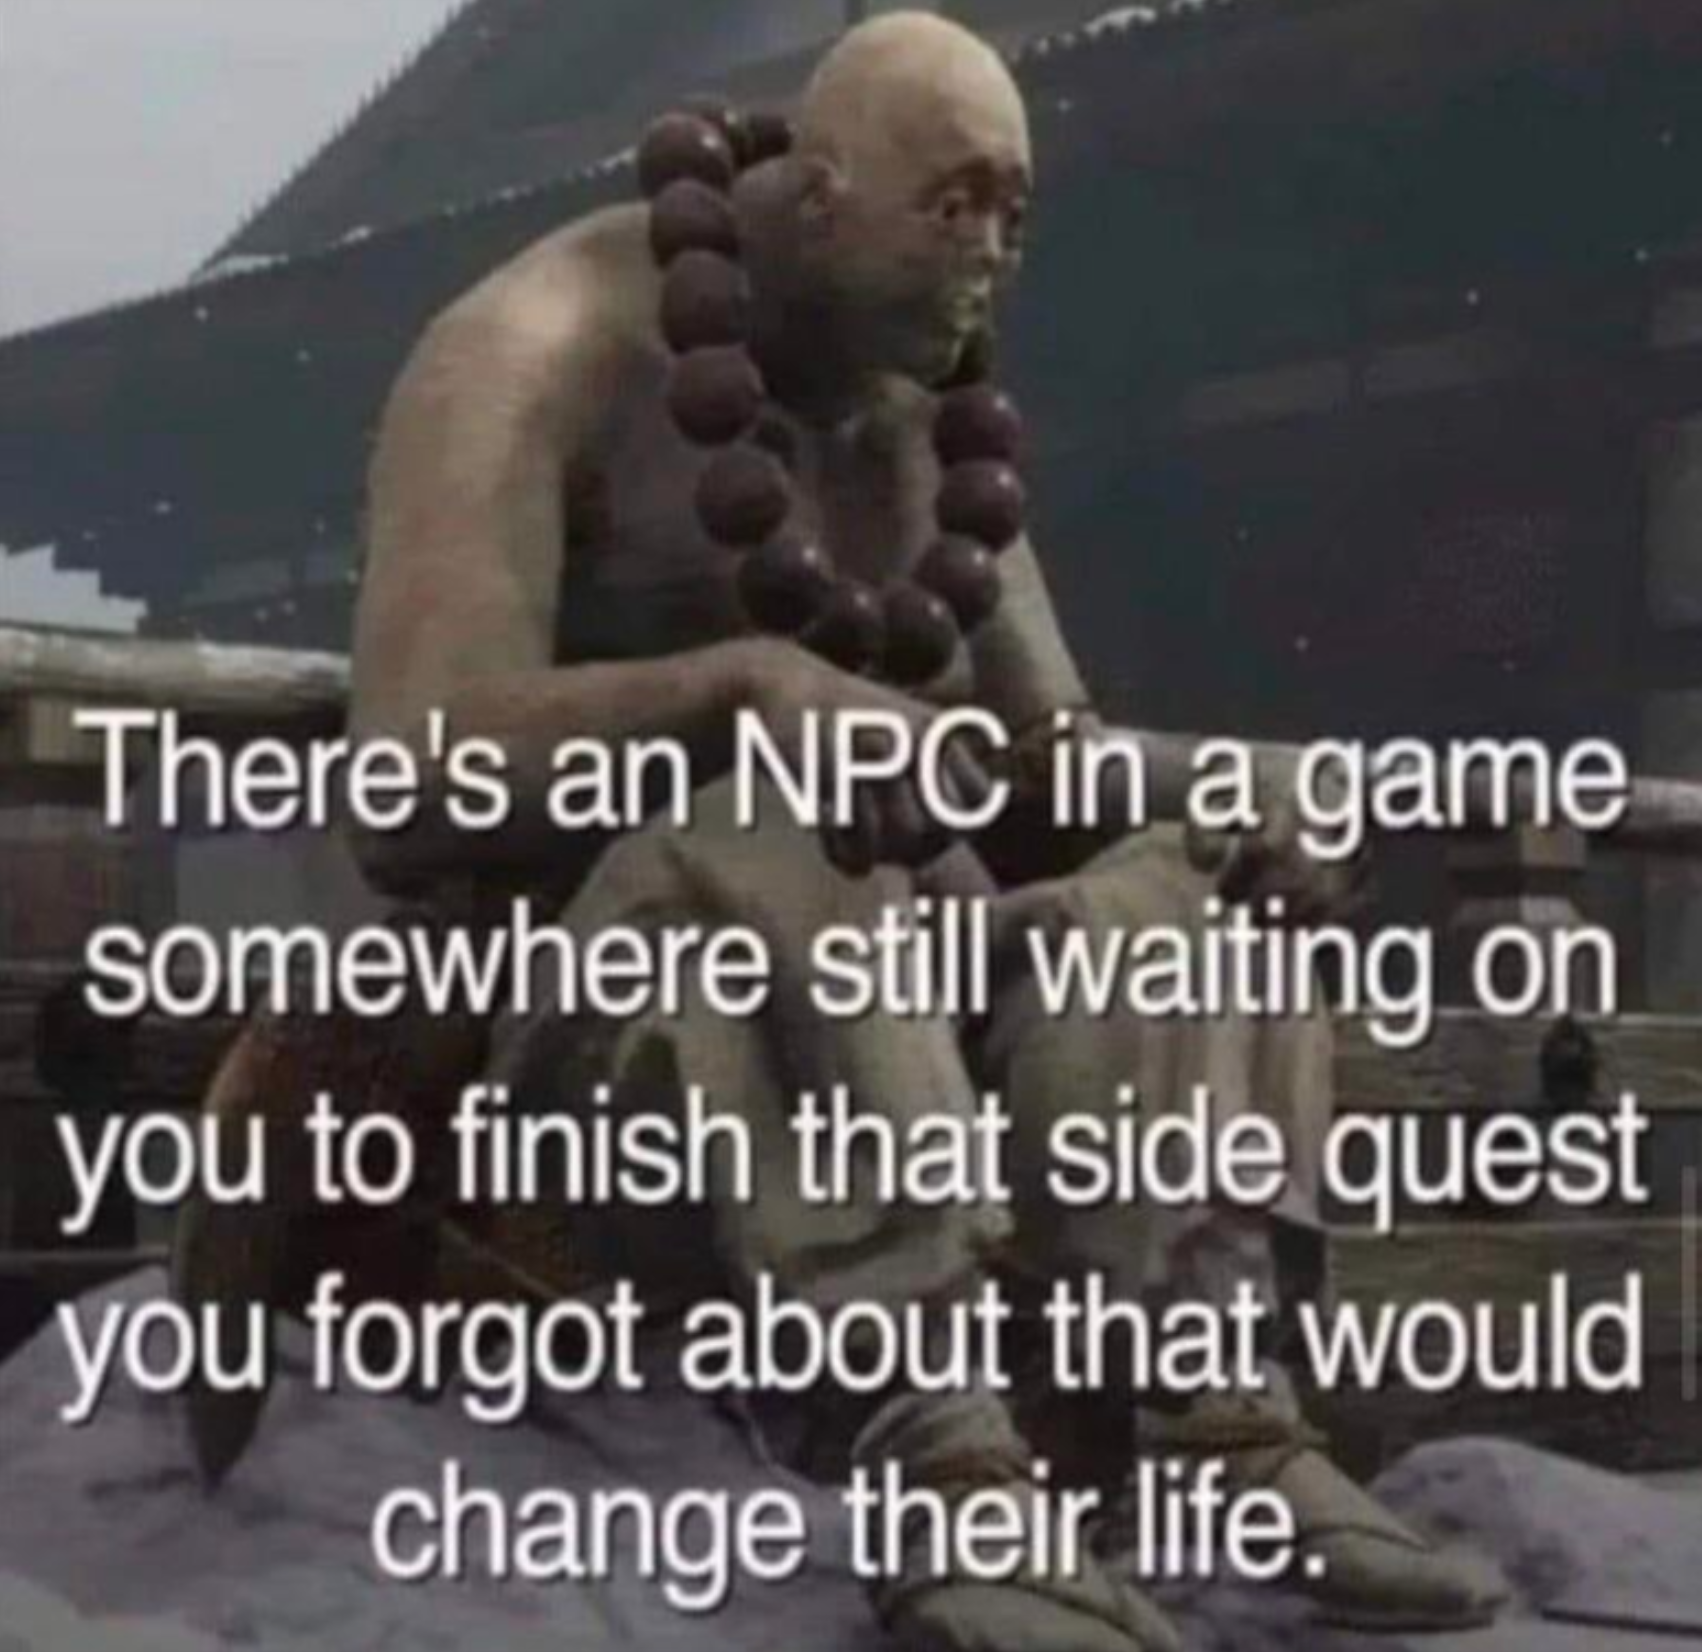 There's an Npc in a game somewhere still waiting on you to finish that side quest you forgot about that would change their life.